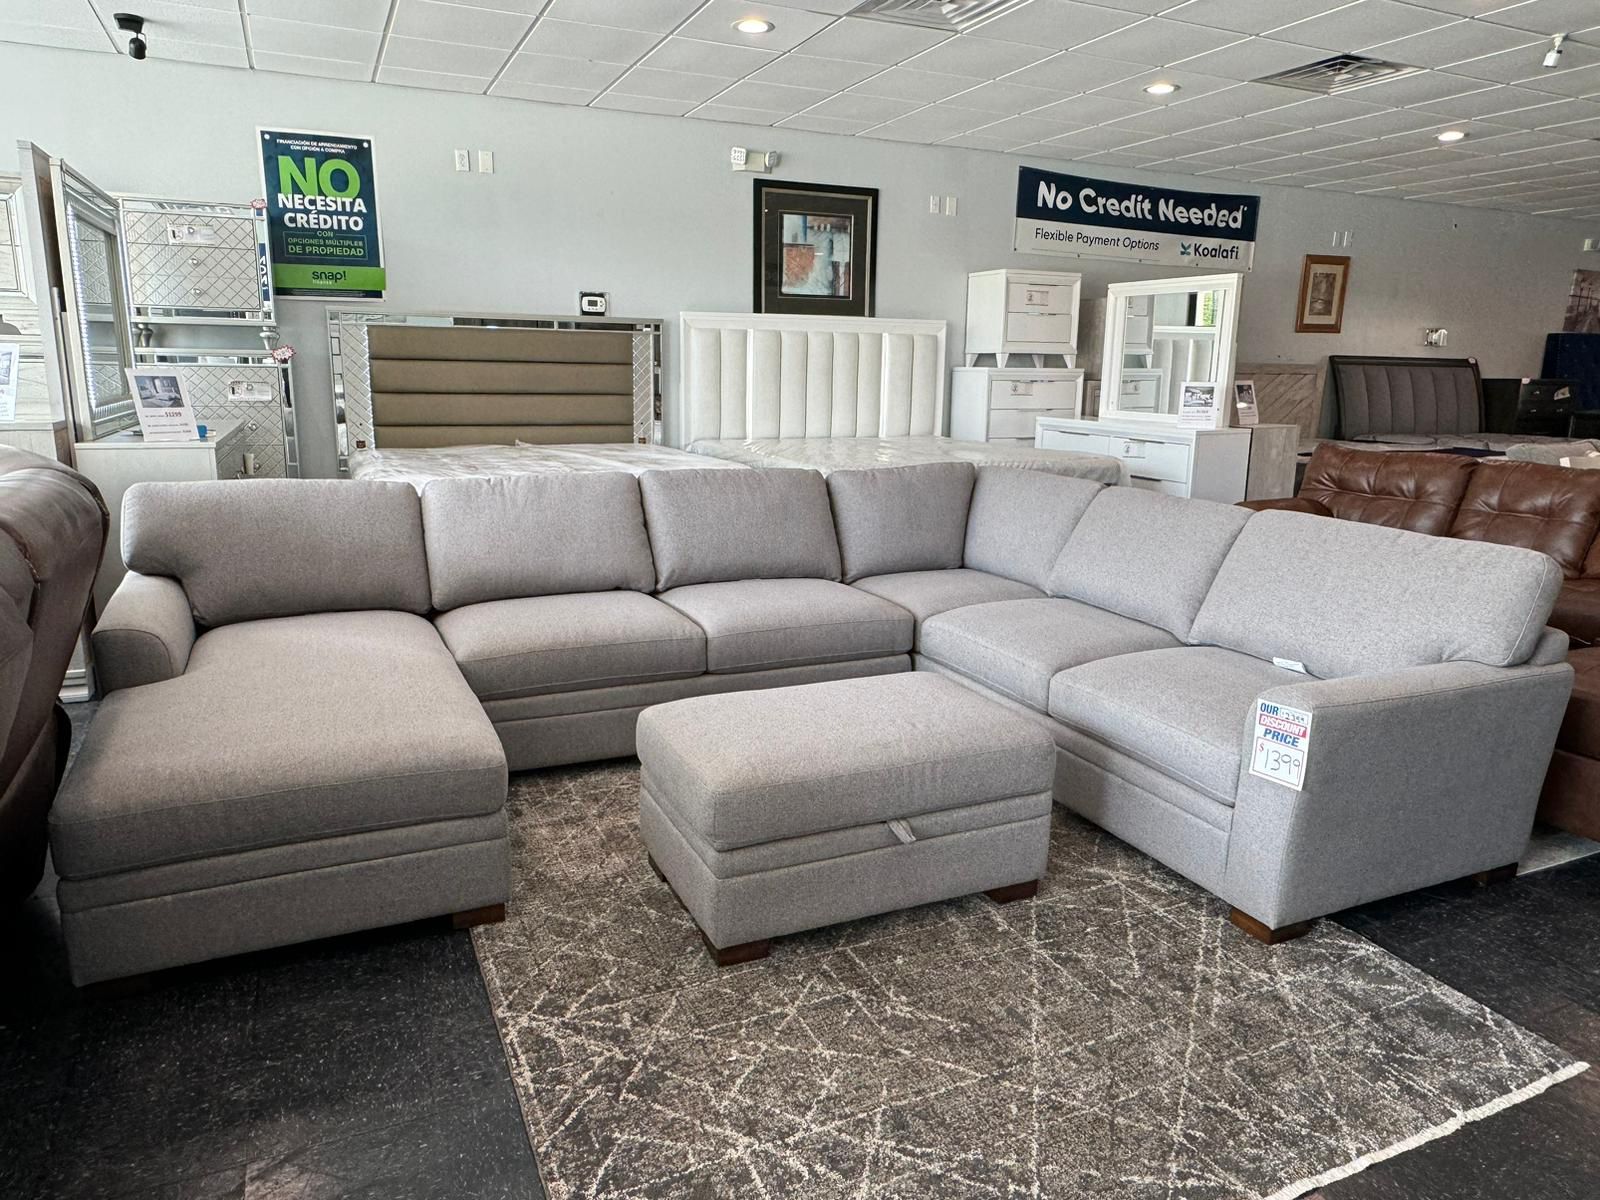 Thomasville Large U Shape Sectional & Storage Ottoman Set For &1399. Delivery Available 